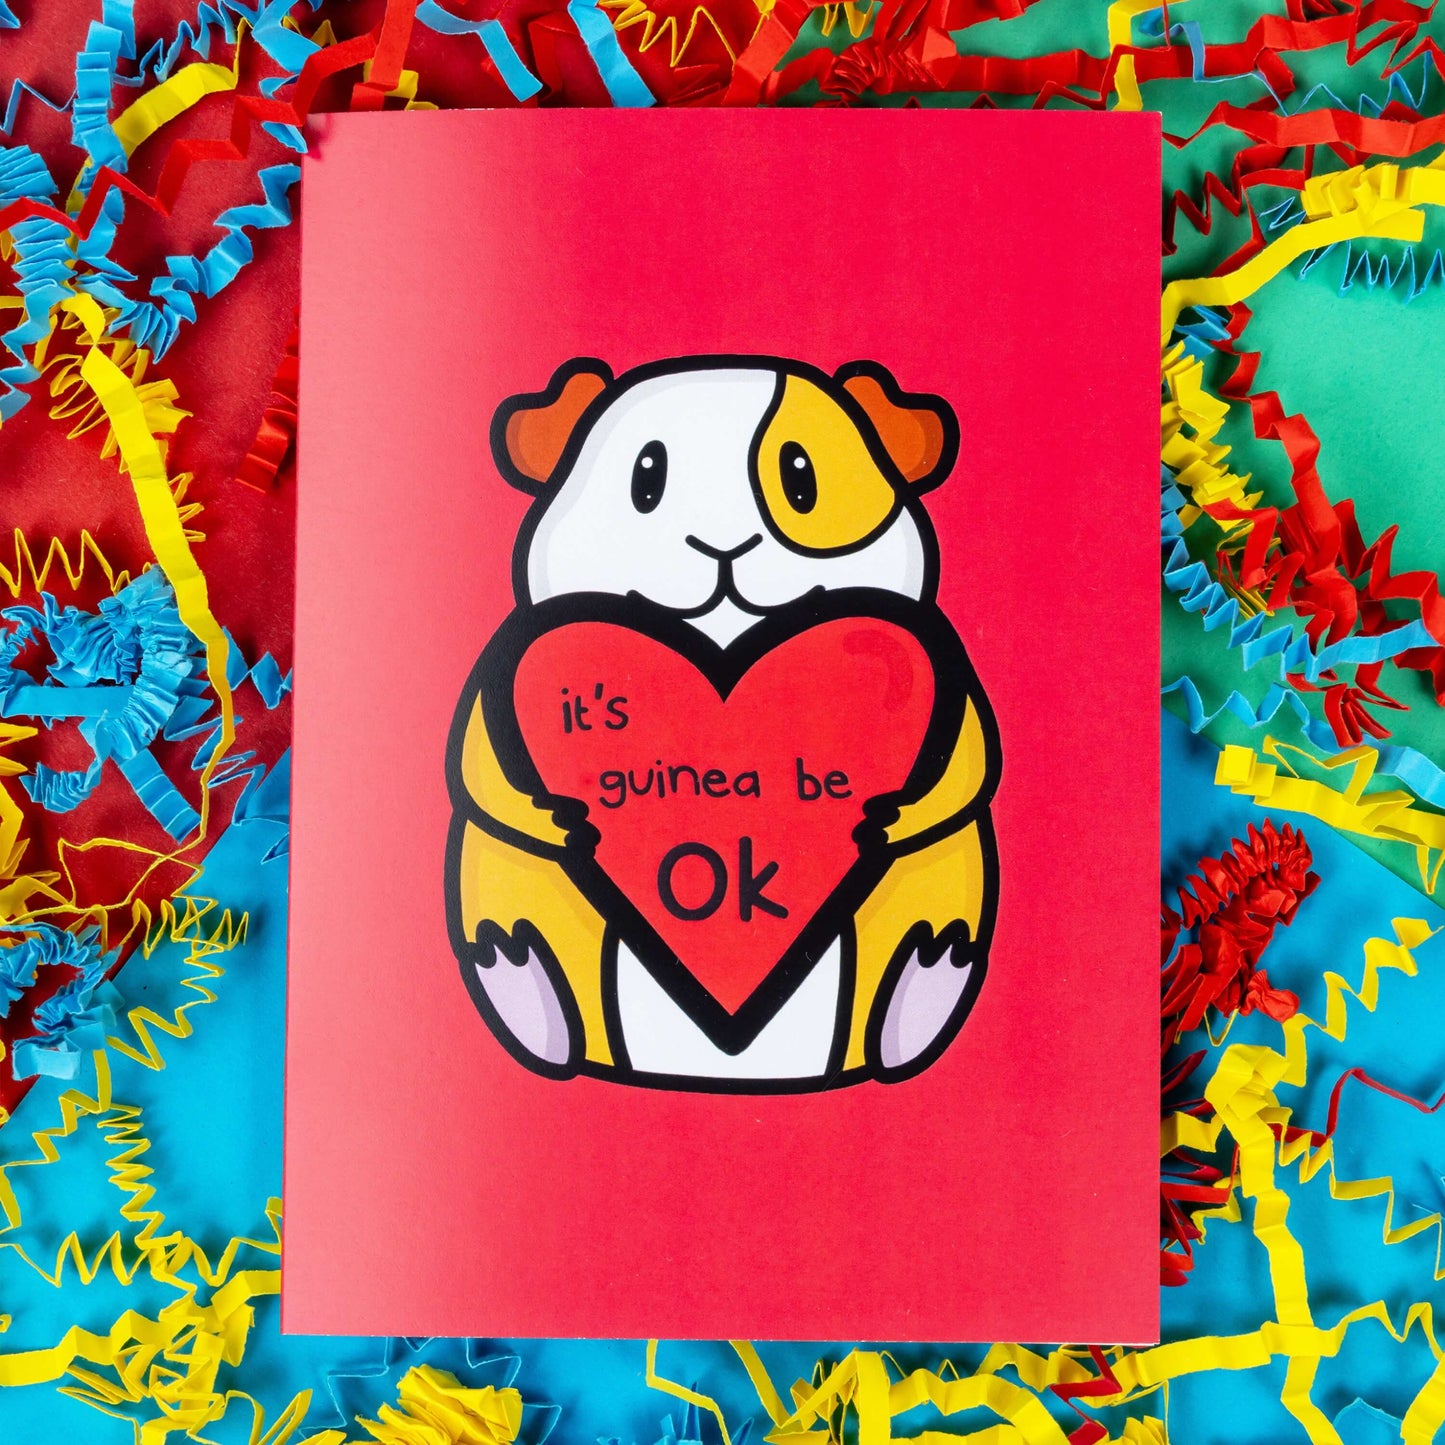 The It's Gonna Be OK Guinea Pig Card on a red, blue and green background with yellow, blue and red crinkle card confetti. The red a6 greeting card features a smiling orange and white guinea pig sat down holding a red heart with black text reading 'it's guinea be ok'. The hand drawn design is a perfect send a hug card as a gentle positive reminder.